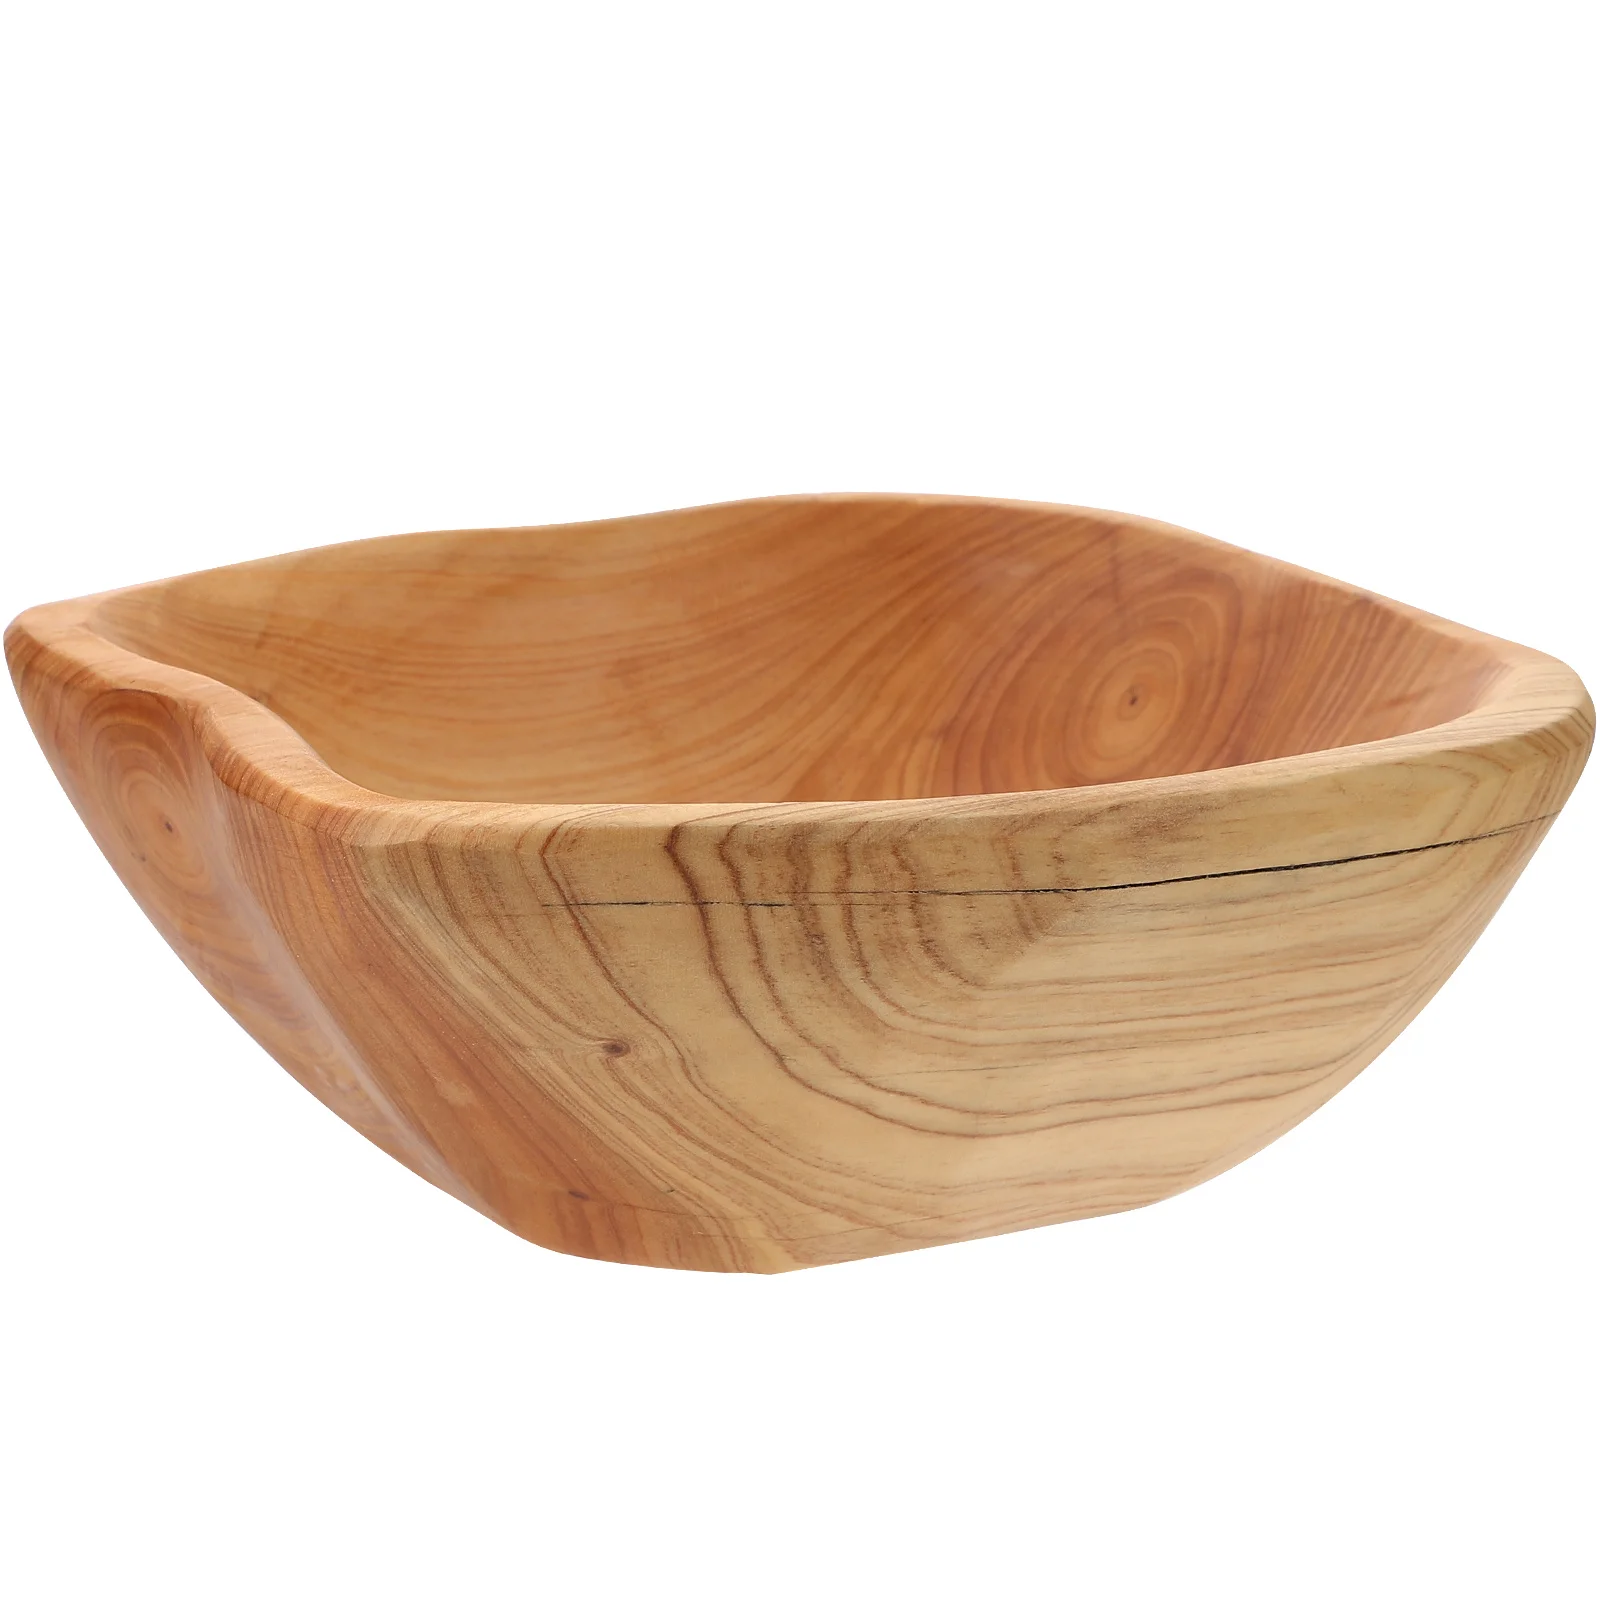 

Bowl Wooden Serving Bowls Fruit Wood Candy Plate Container Tray Salad Platter Dish Appetizer Dessert Party Snack Carved